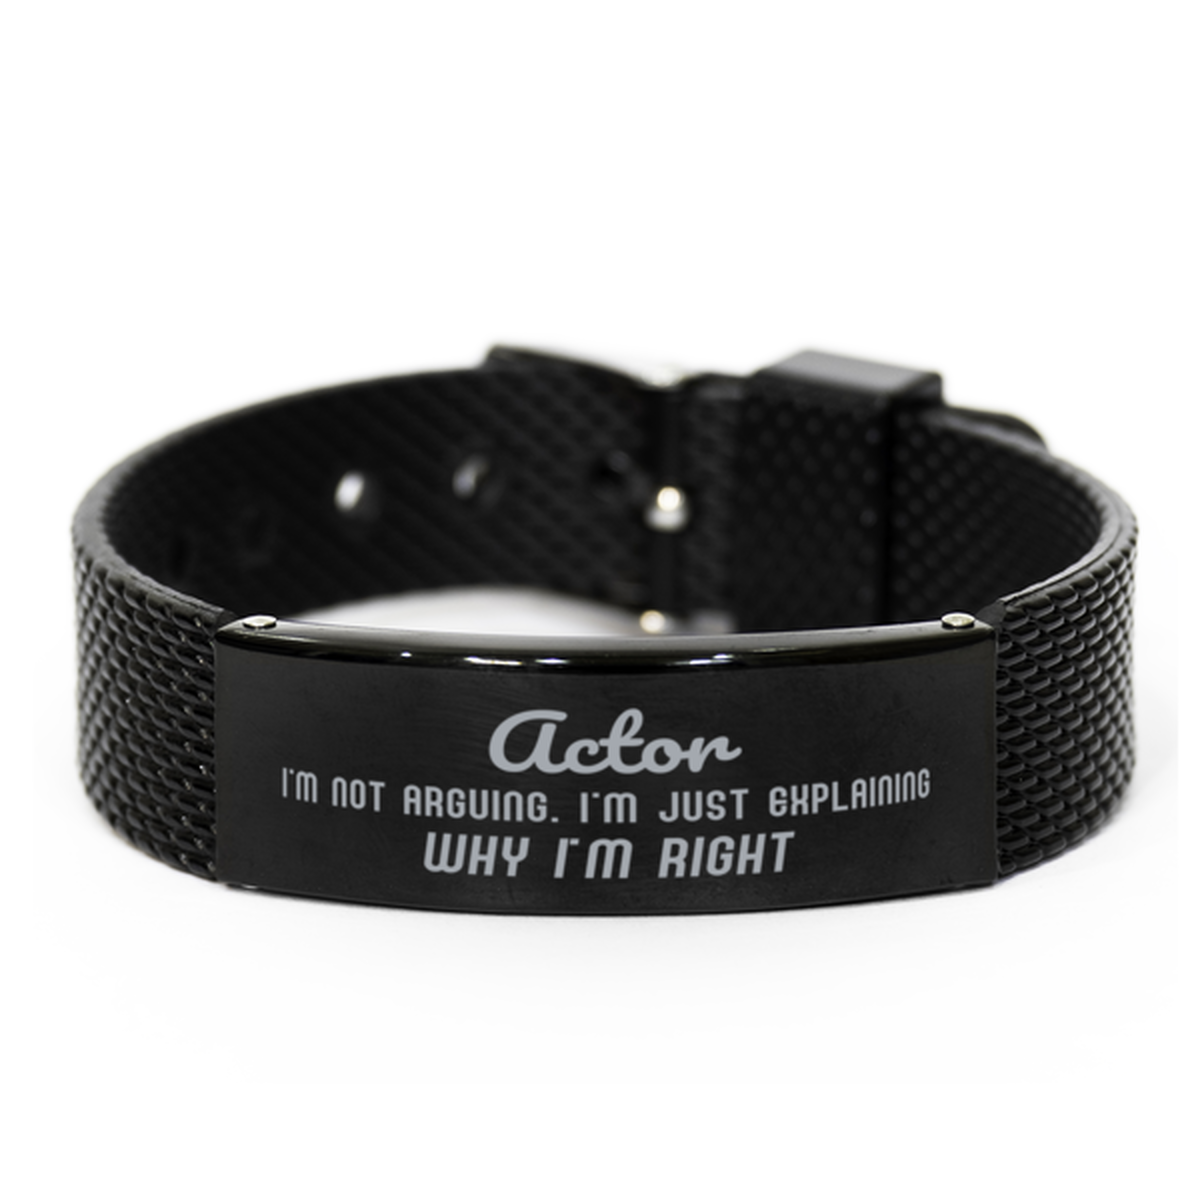 Actor I'm not Arguing. I'm Just Explaining Why I'm RIGHT Black Shark Mesh Bracelet, Funny Saying Quote Actor Gifts For Actor Graduation Birthday Christmas Gifts for Men Women Coworker